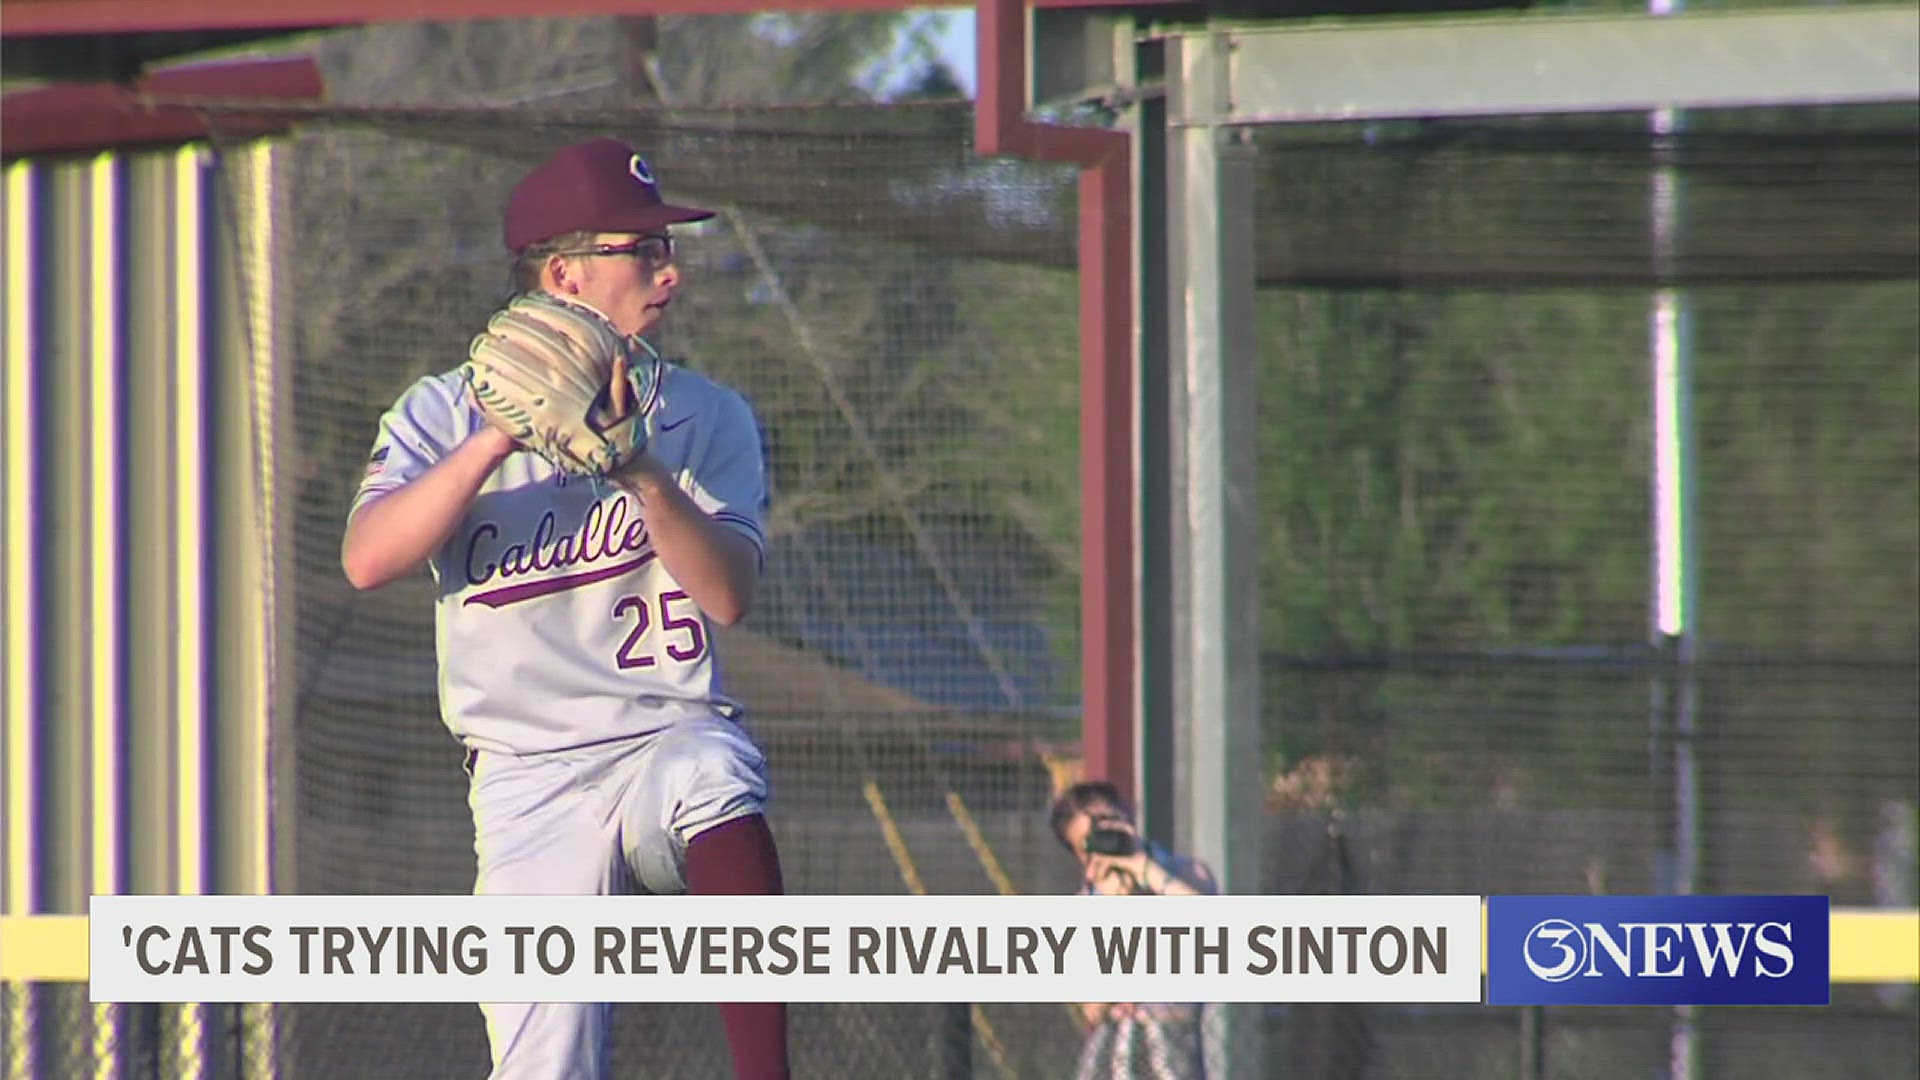 The 'Cats beat the Pirates in the regular season, their first first victory over Sinton in five years.